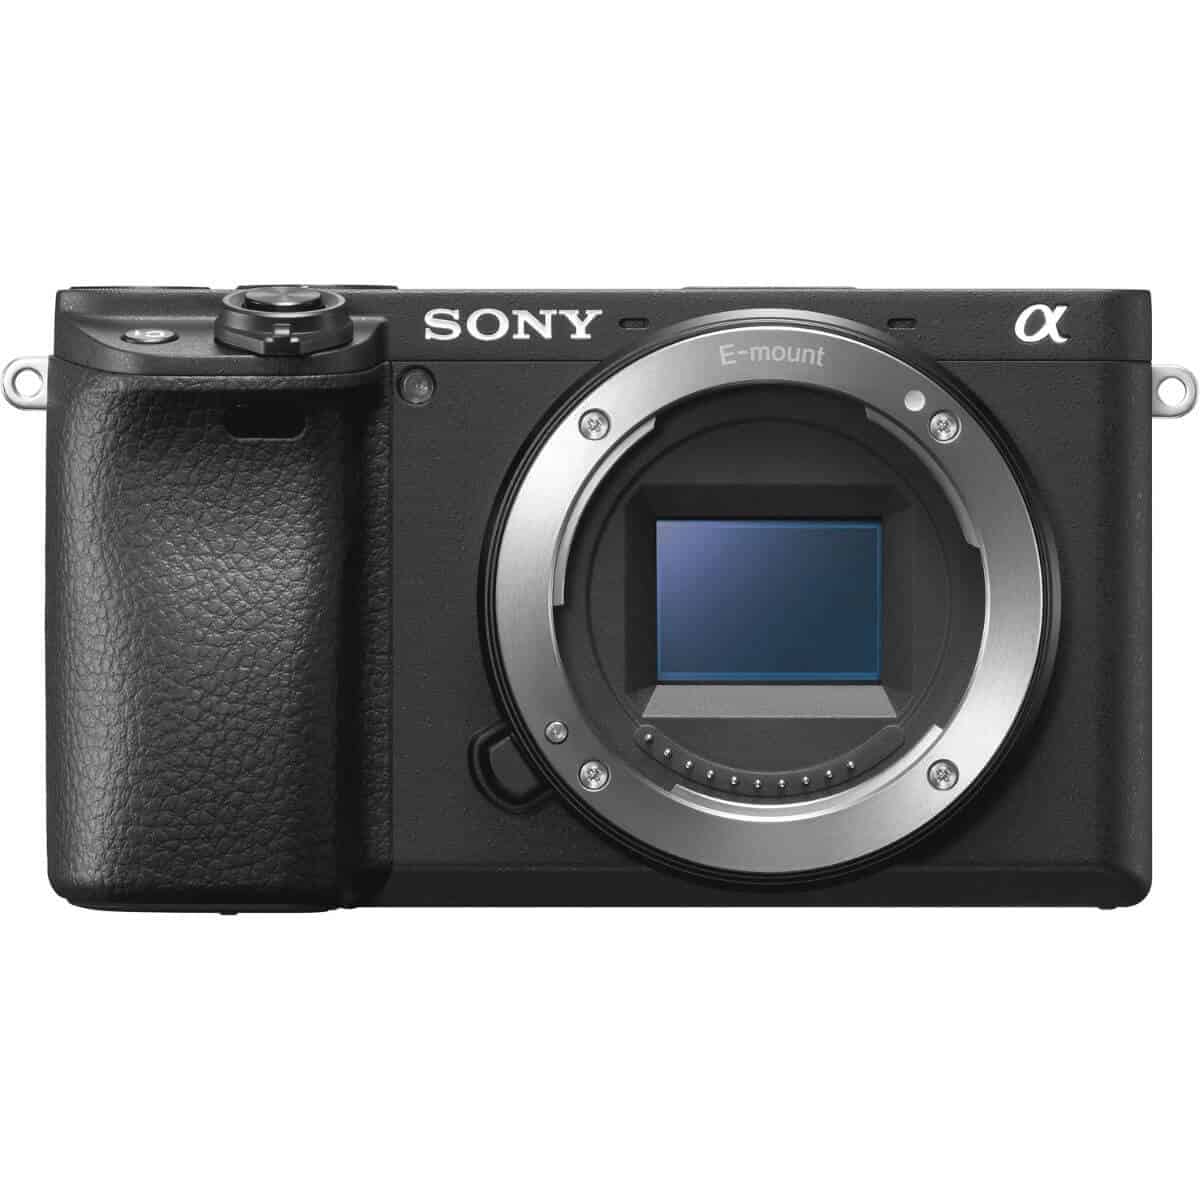 Sony a6400 camera without a lens.